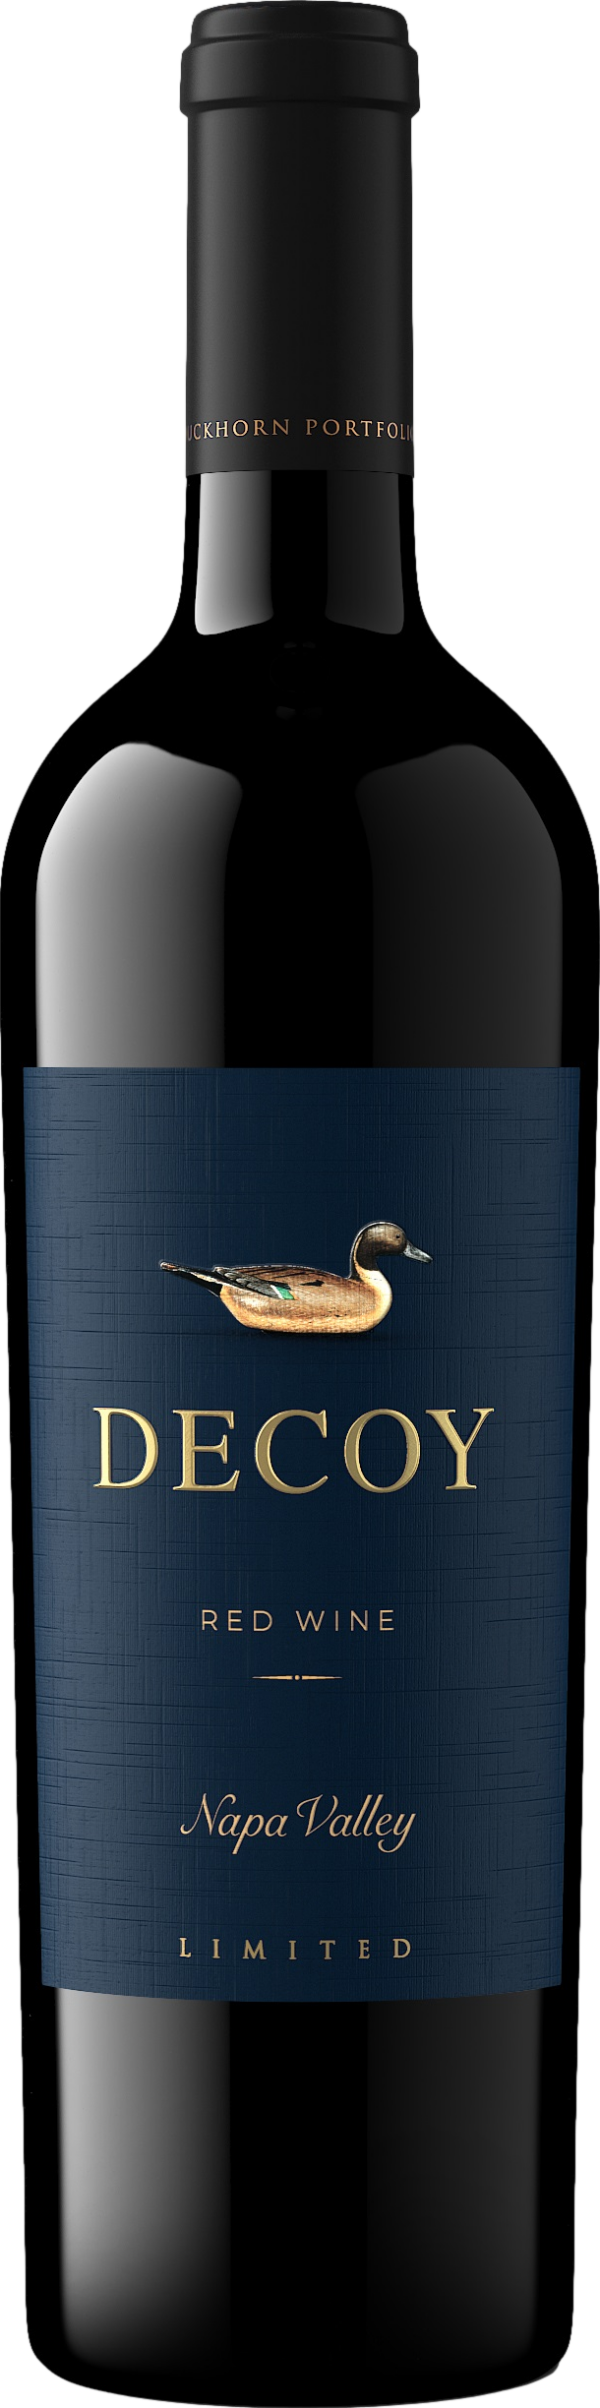 Product image of Duckhorn Decoy Limited Napa Valley Red Blend 2019 from 8wines